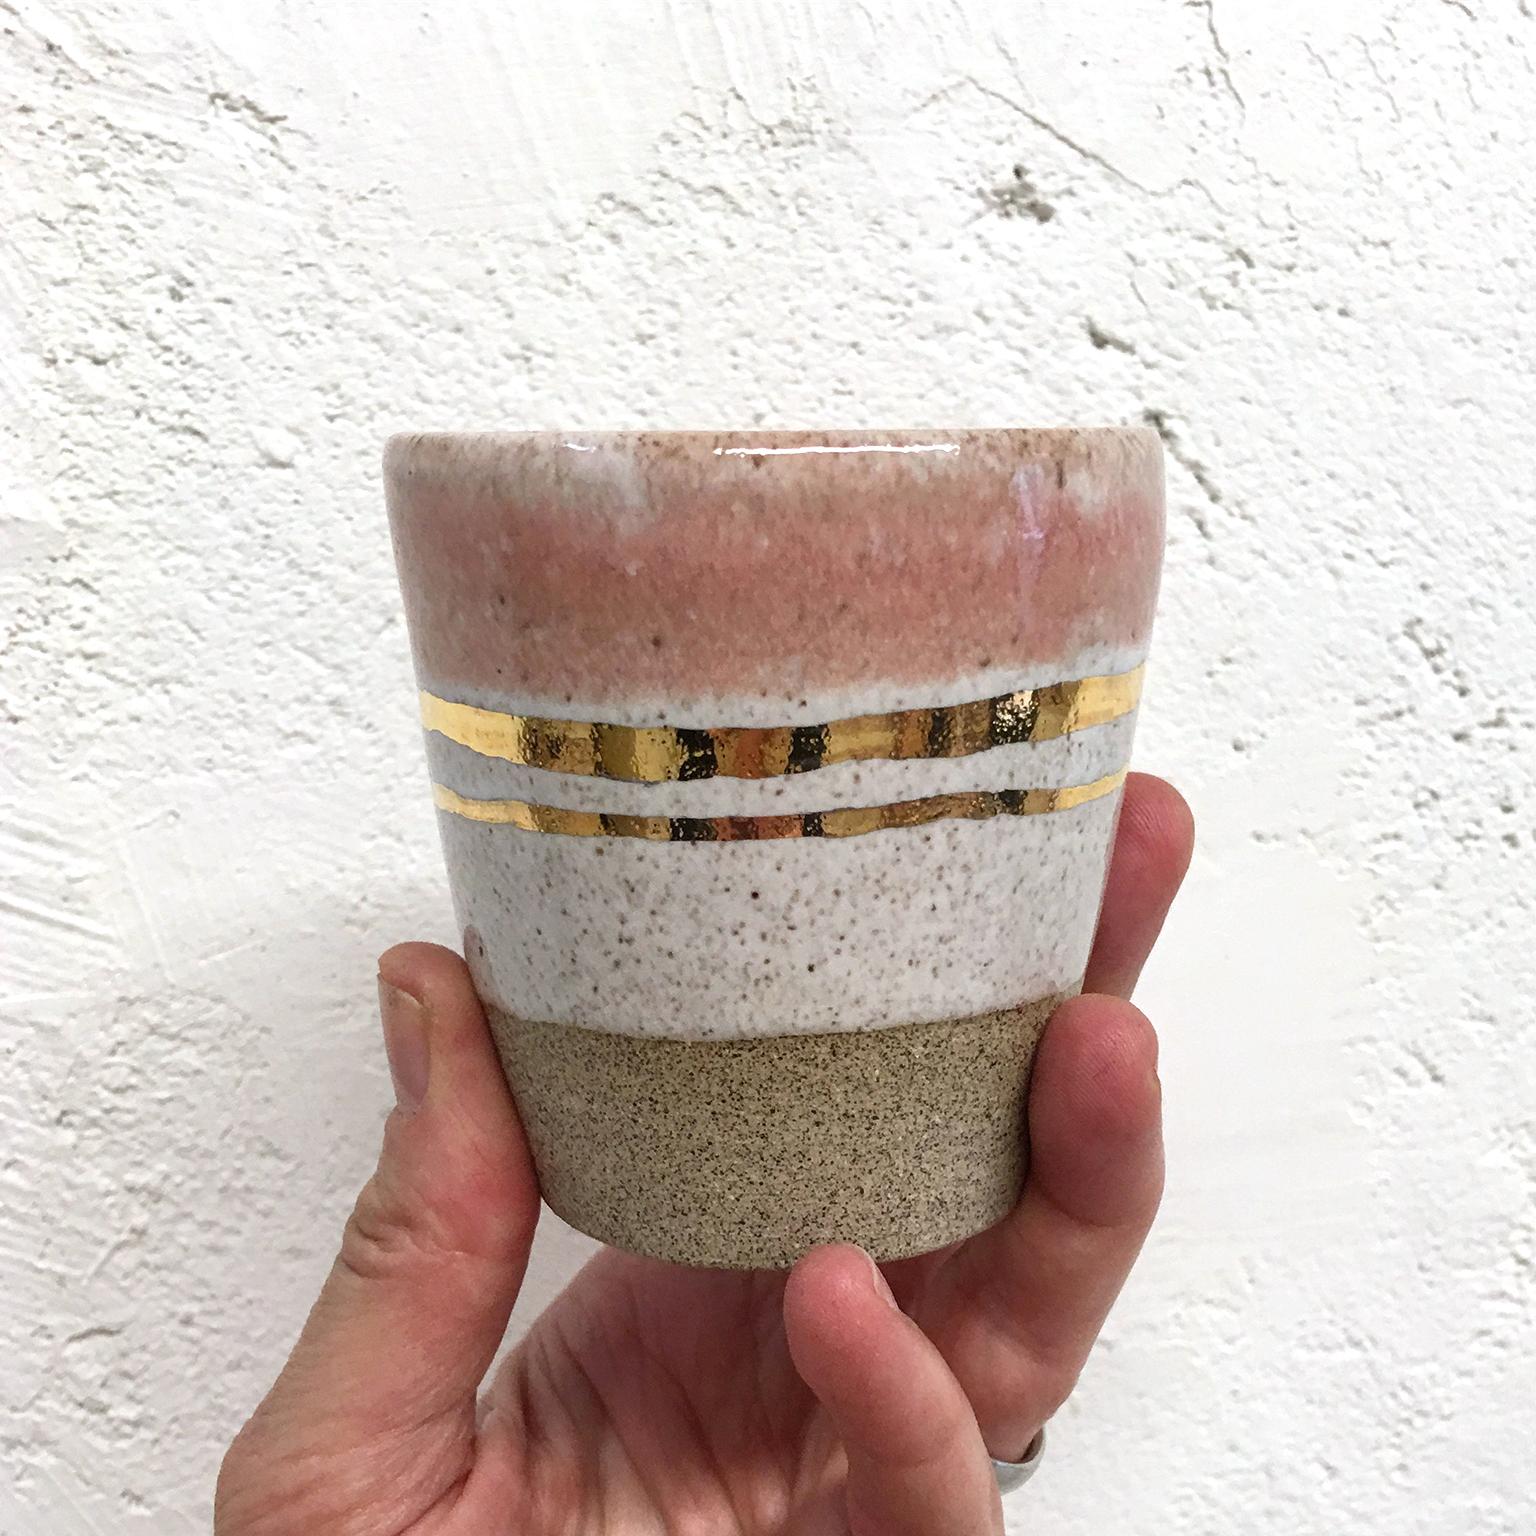 Kim Brown's lightly speckled stoneware cups are wheel thrown and glazed in white and rose with 22-karat gold luster stripes. Measuring approximately 3.25